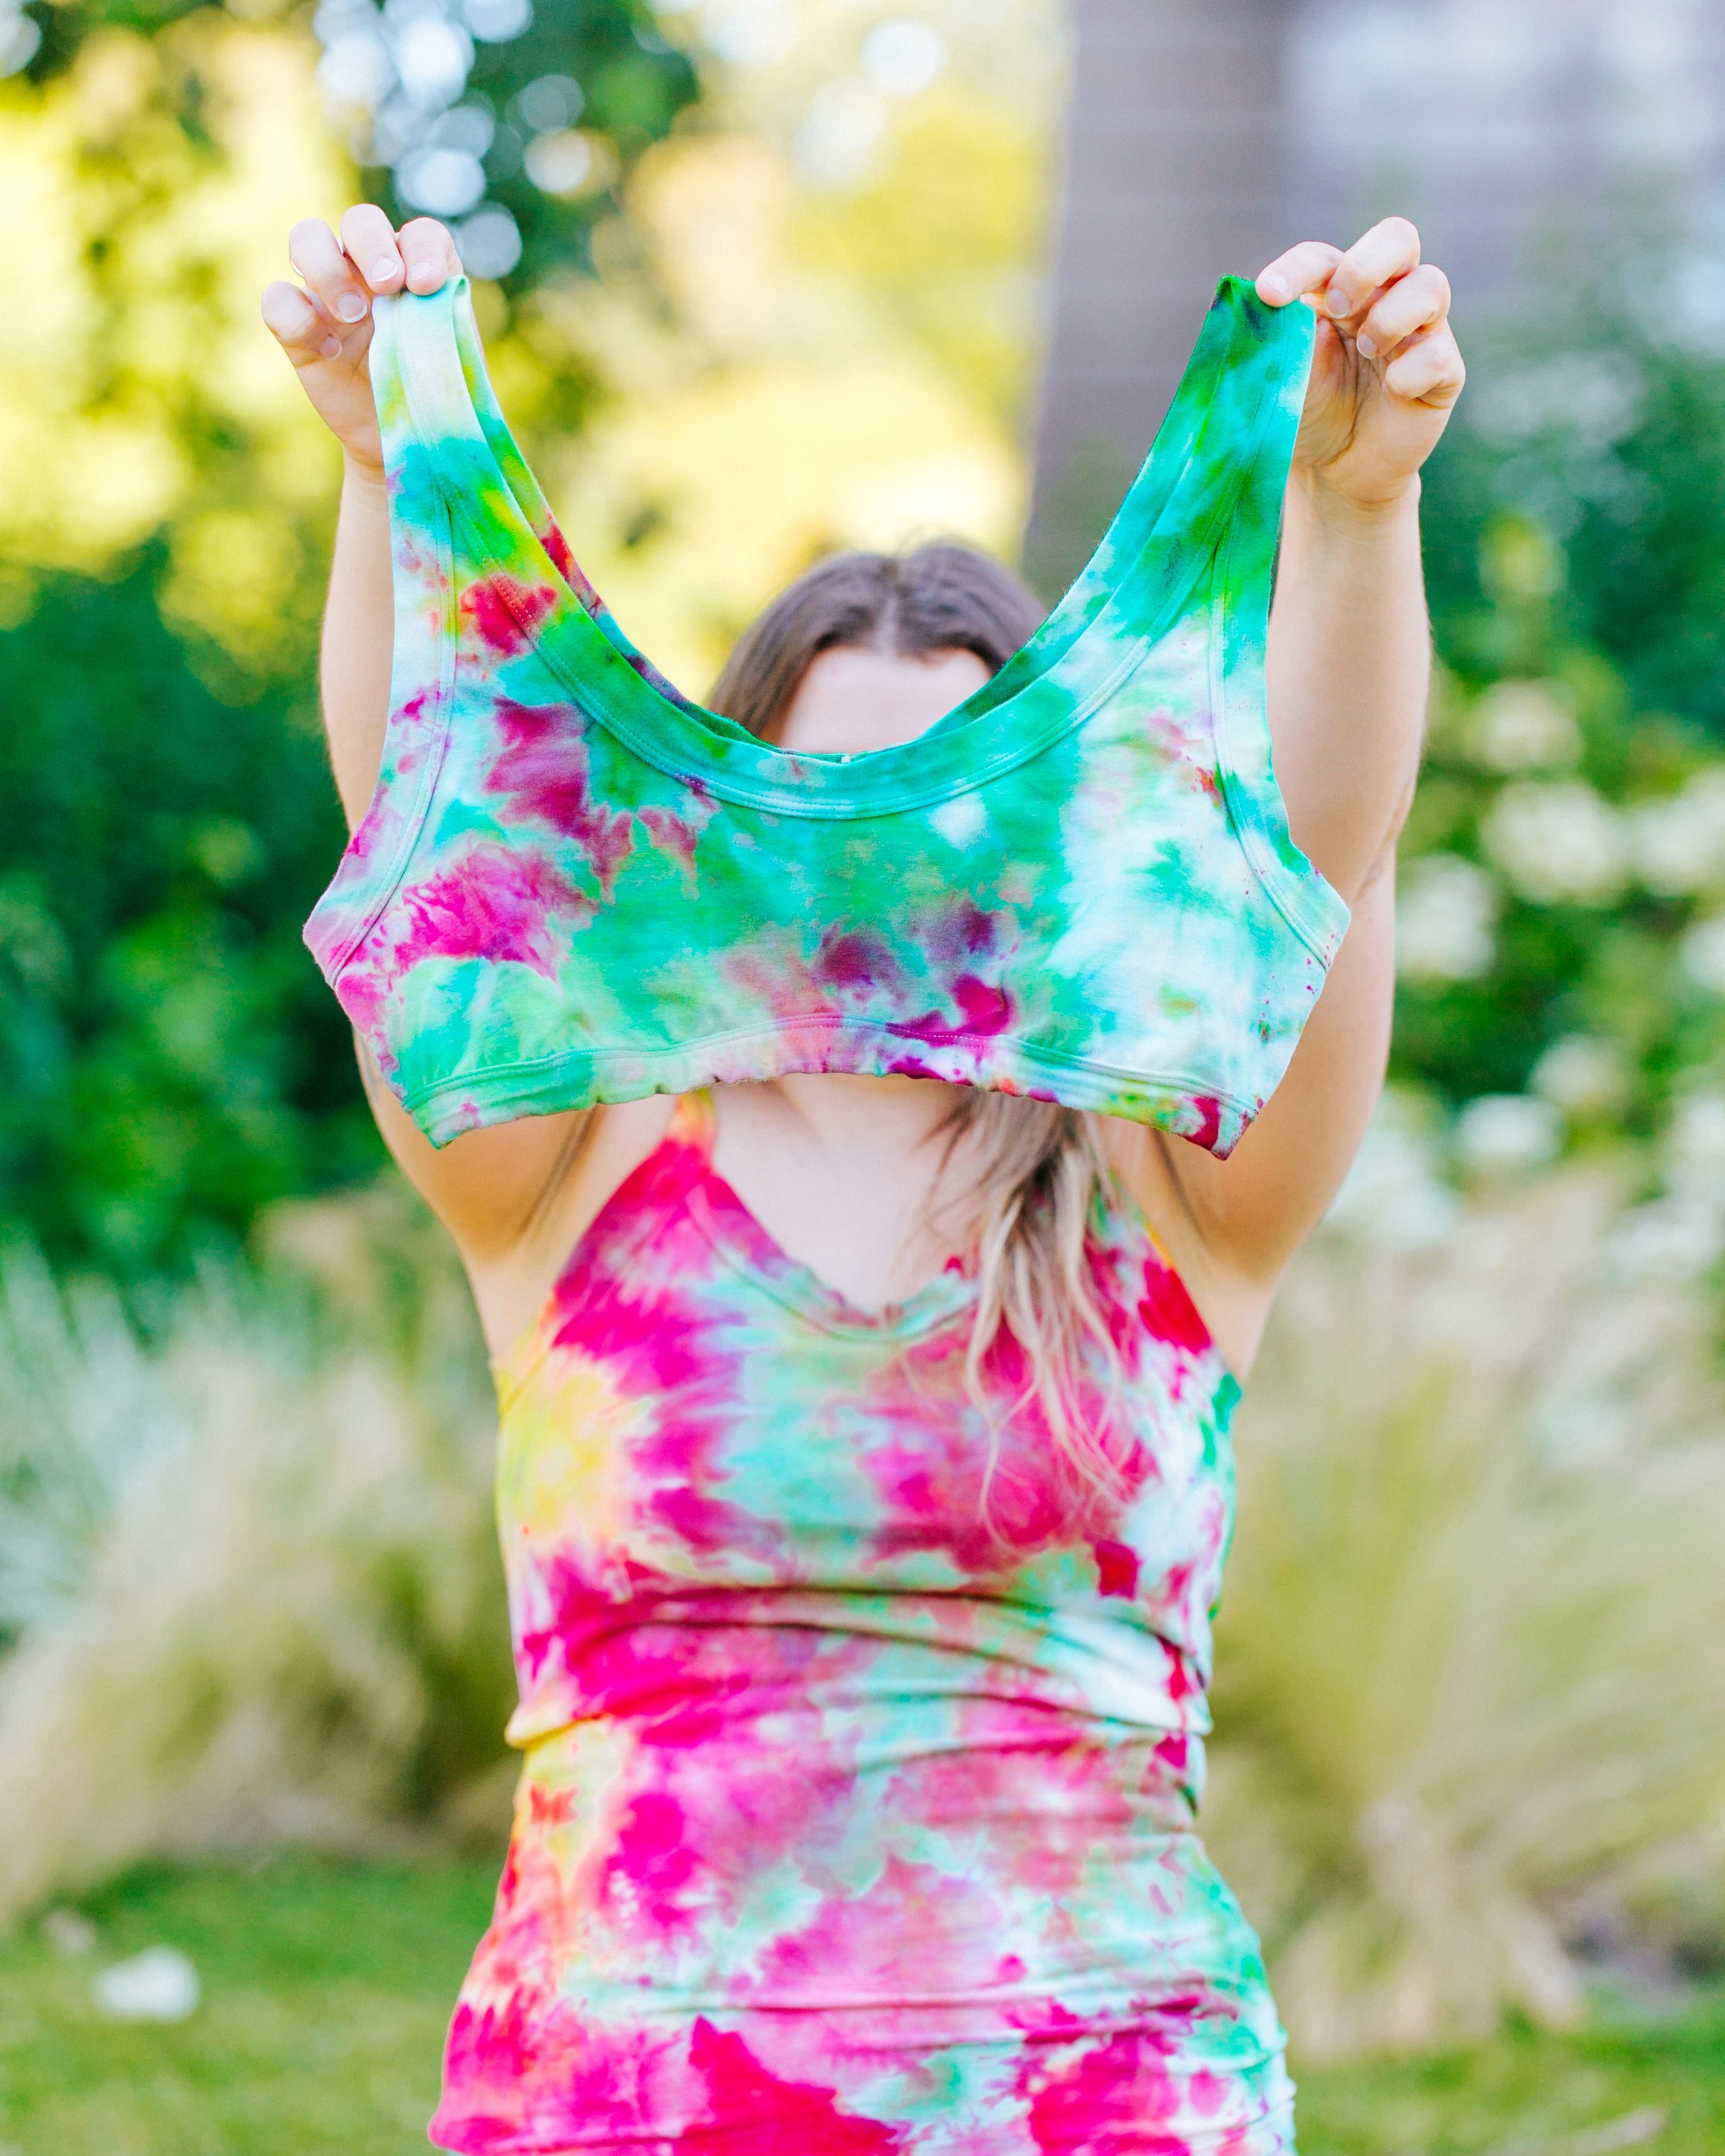 Model holding up an Ice Dyed Bralette with a mix of bright green and pink colors.